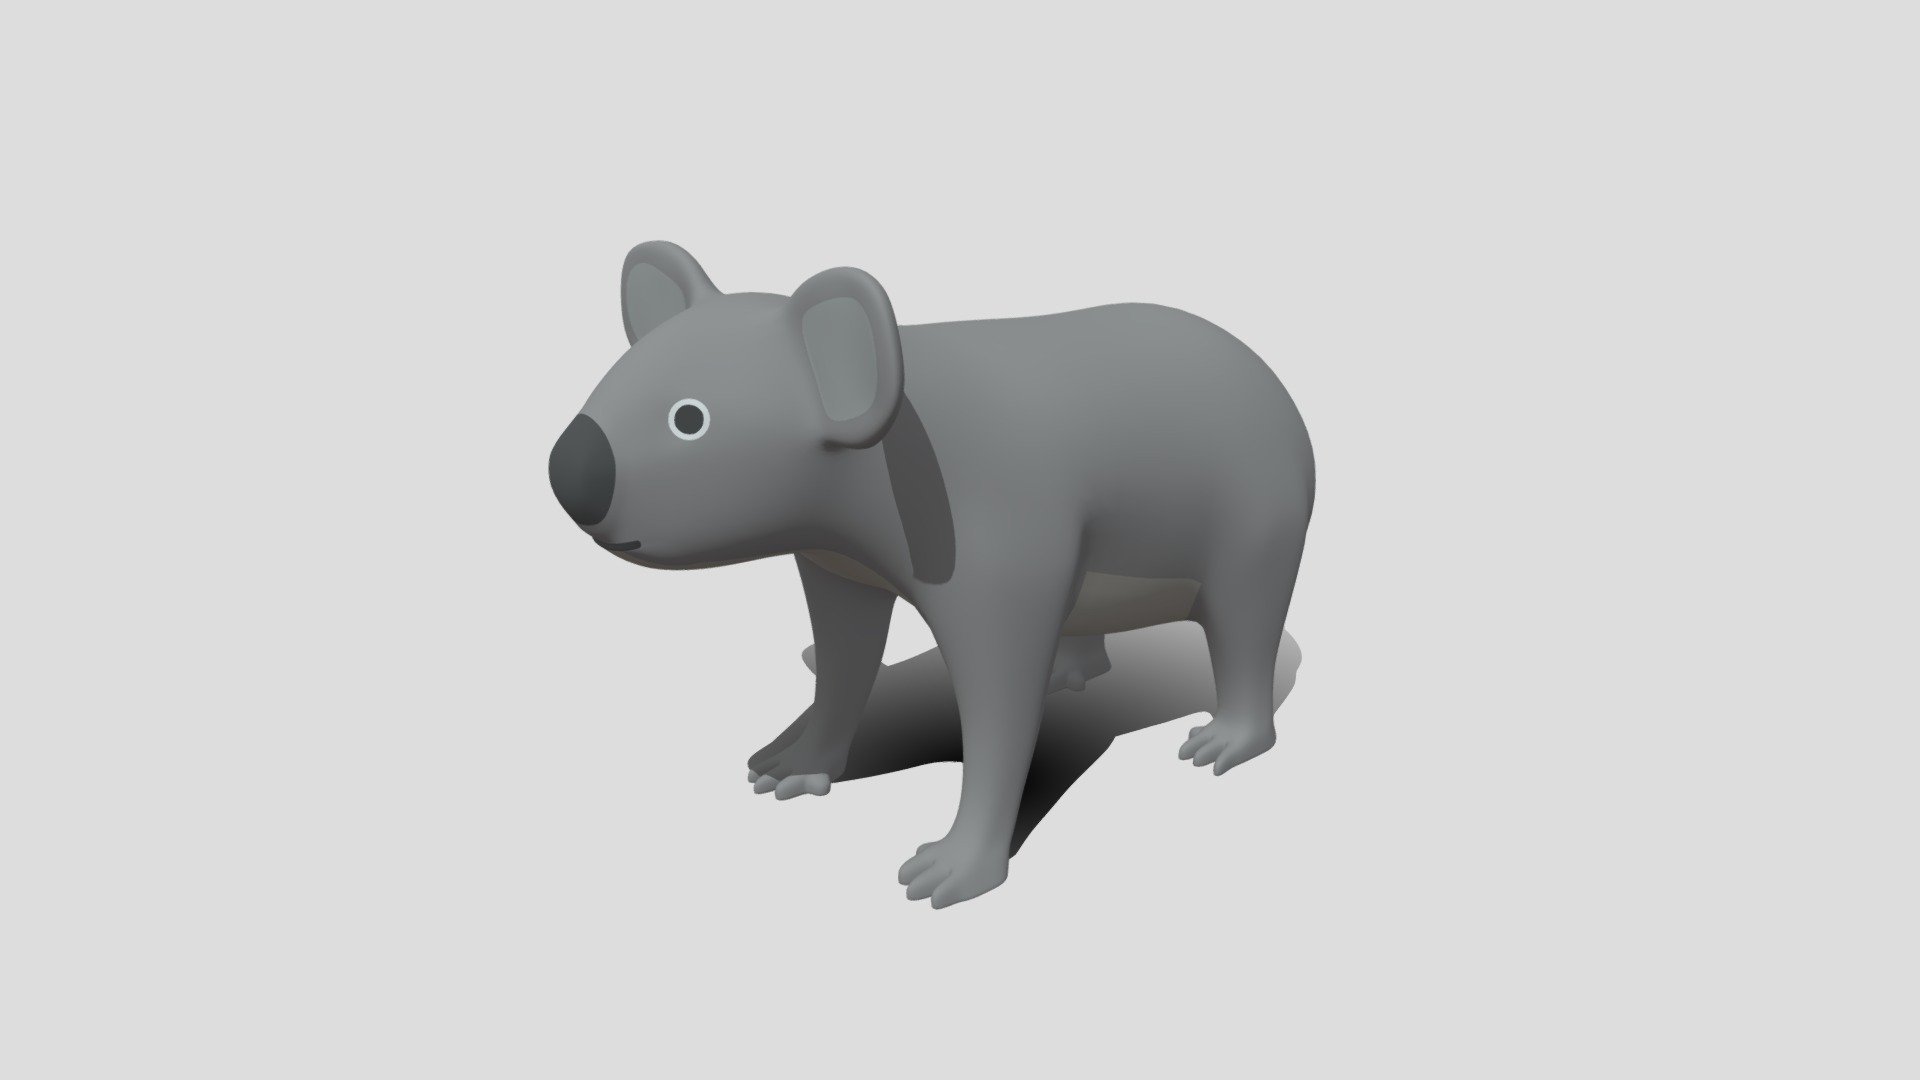 This is a 3d model of a cartoon koala. The koala was modeled and prepared for cartoon style renderings, background, general CG visualization etc presented as a mesh with quads only.

Verts : 14.274 Faces: 14.272

The 3d koala have simple materials with diffuse colors.

No ring, maps and no UVW mapping is available.

The original file was created in blender. You will receive a 3DS, OBJ, FBX, blend, DAE, Stl.

All preview images were rendered with Blender Cycles. Product is ready to render out-of-the-box. Please note that the lights, cameras, and background is only included in the .blend file. The model is clean and alone in the other provided files, centred at origin and has real-world scale 3d model